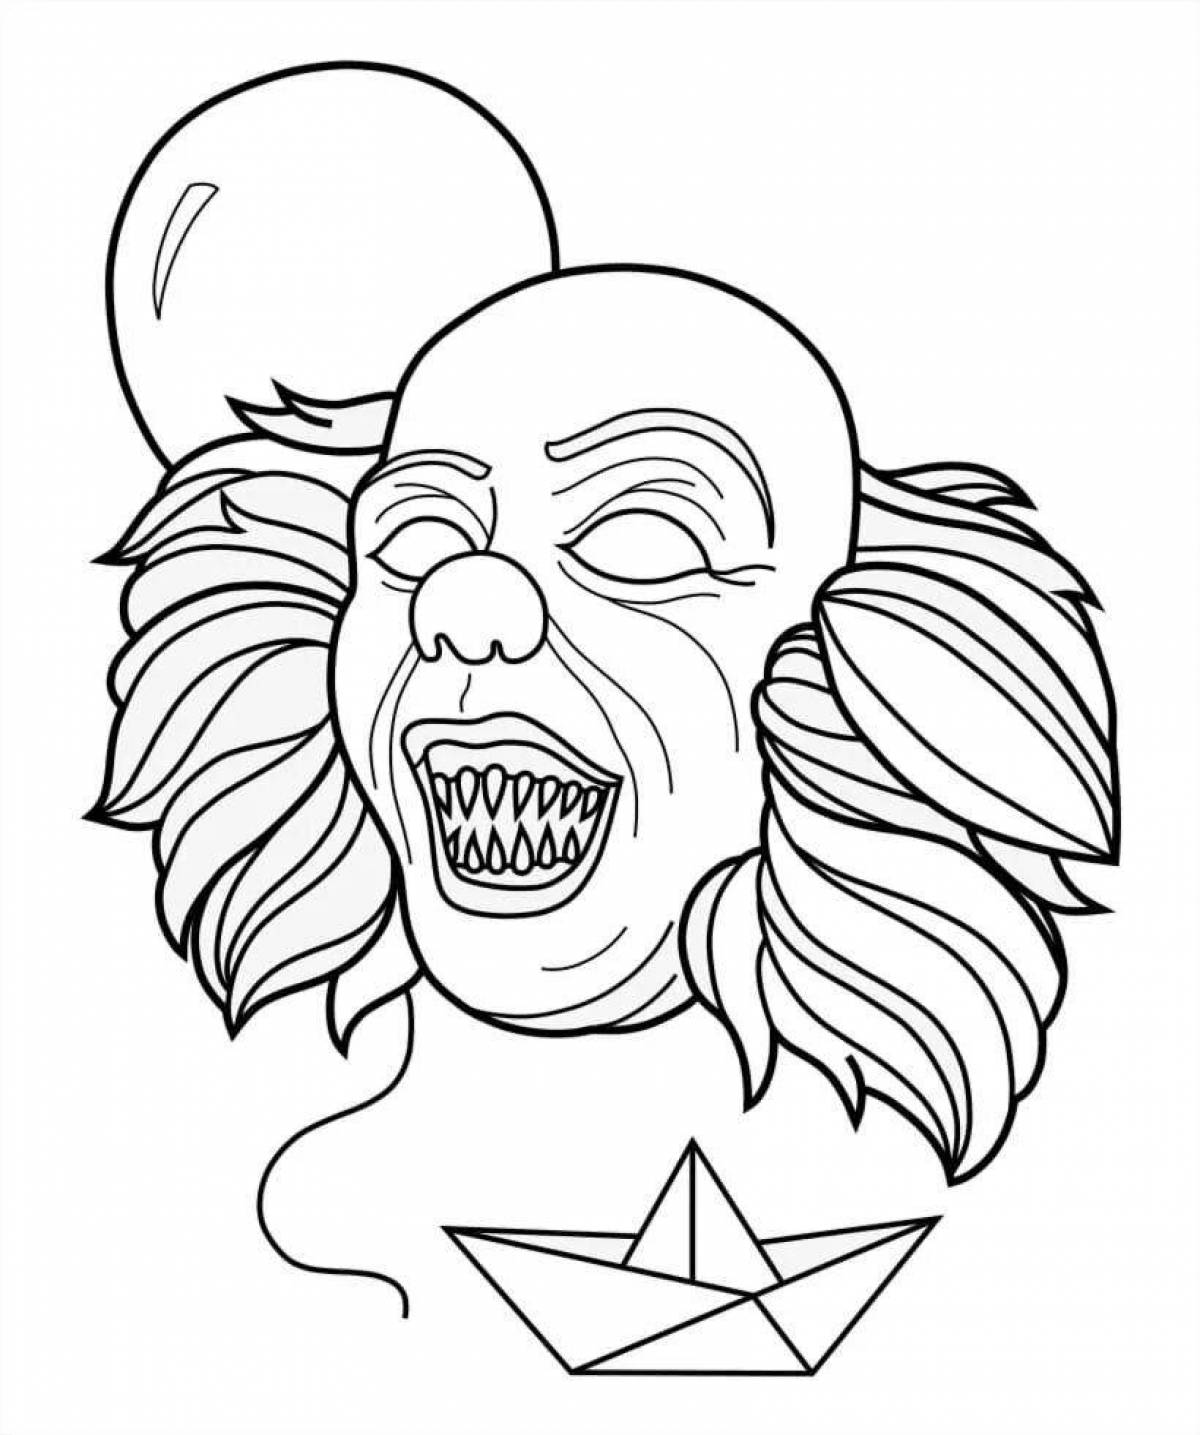 Disgusting pennywise clown coloring book